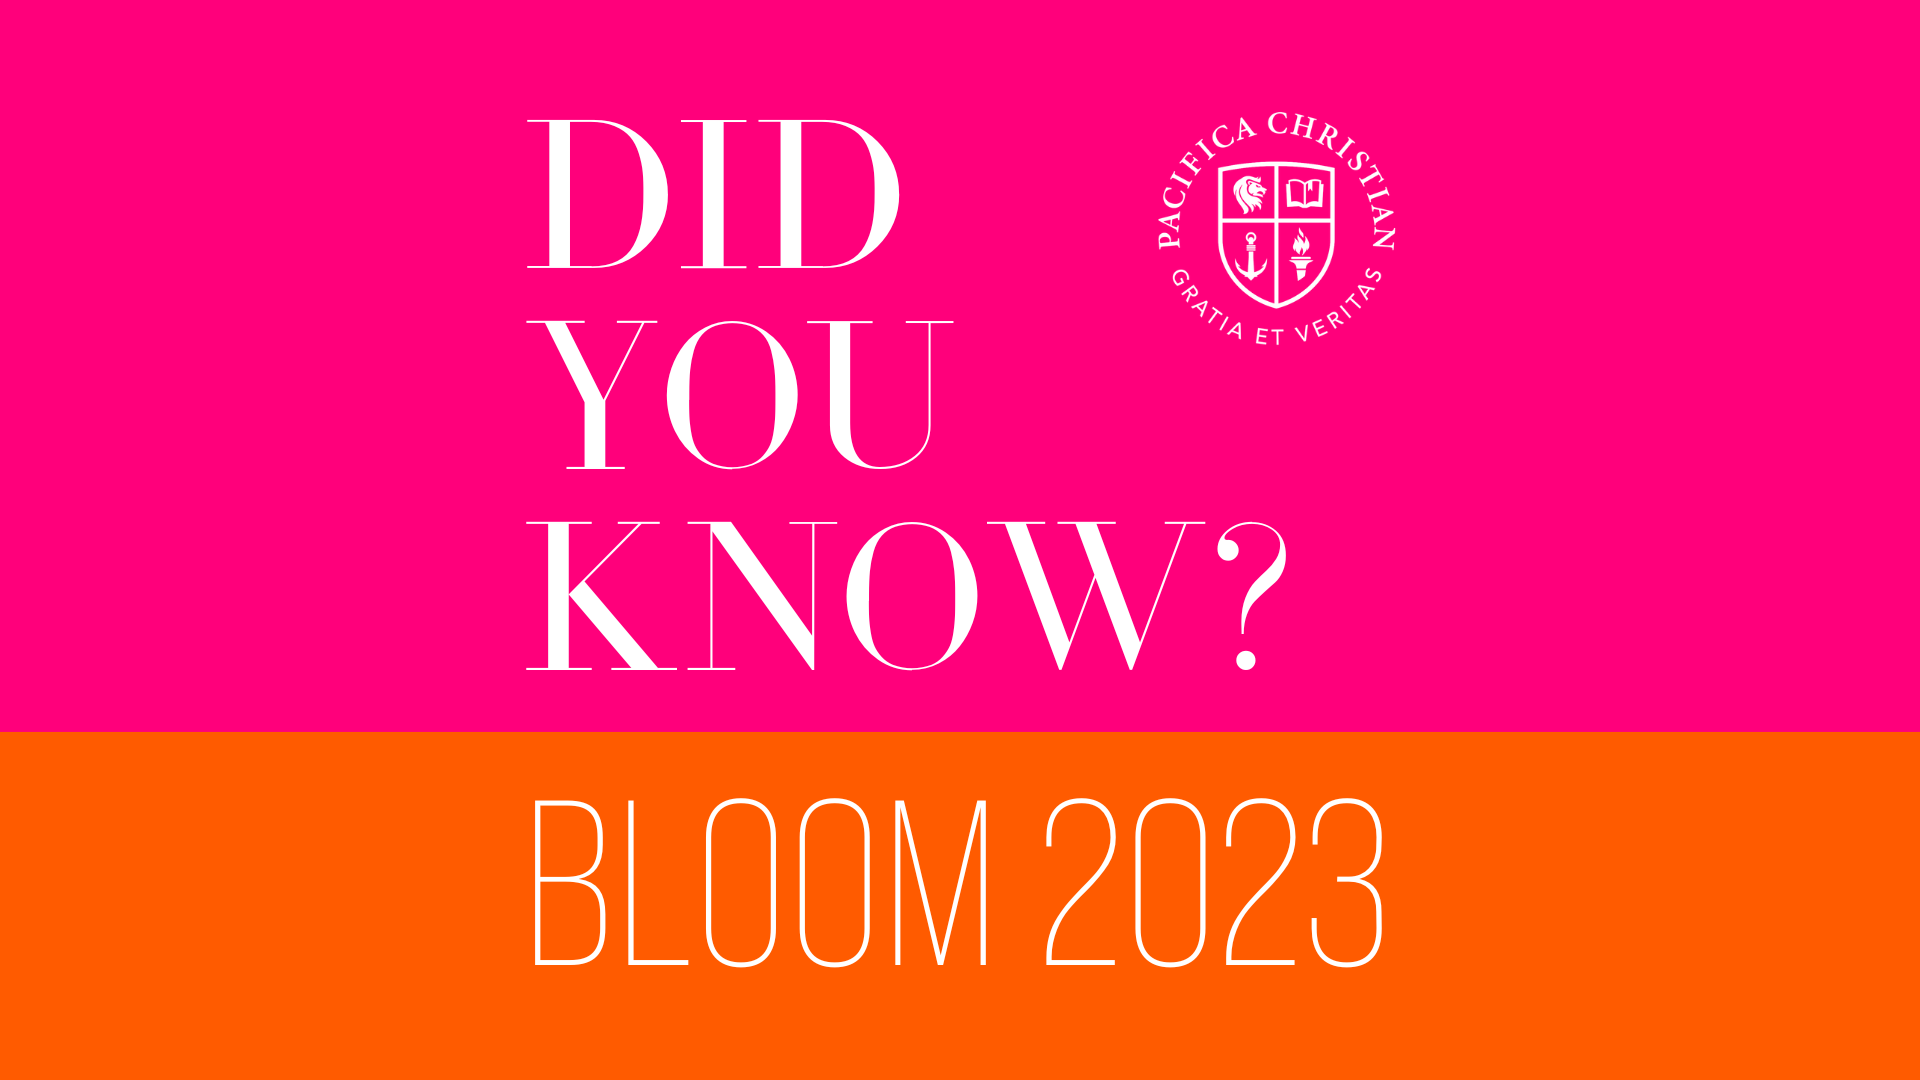 Save the Date for Bloom - April 29, 2023!